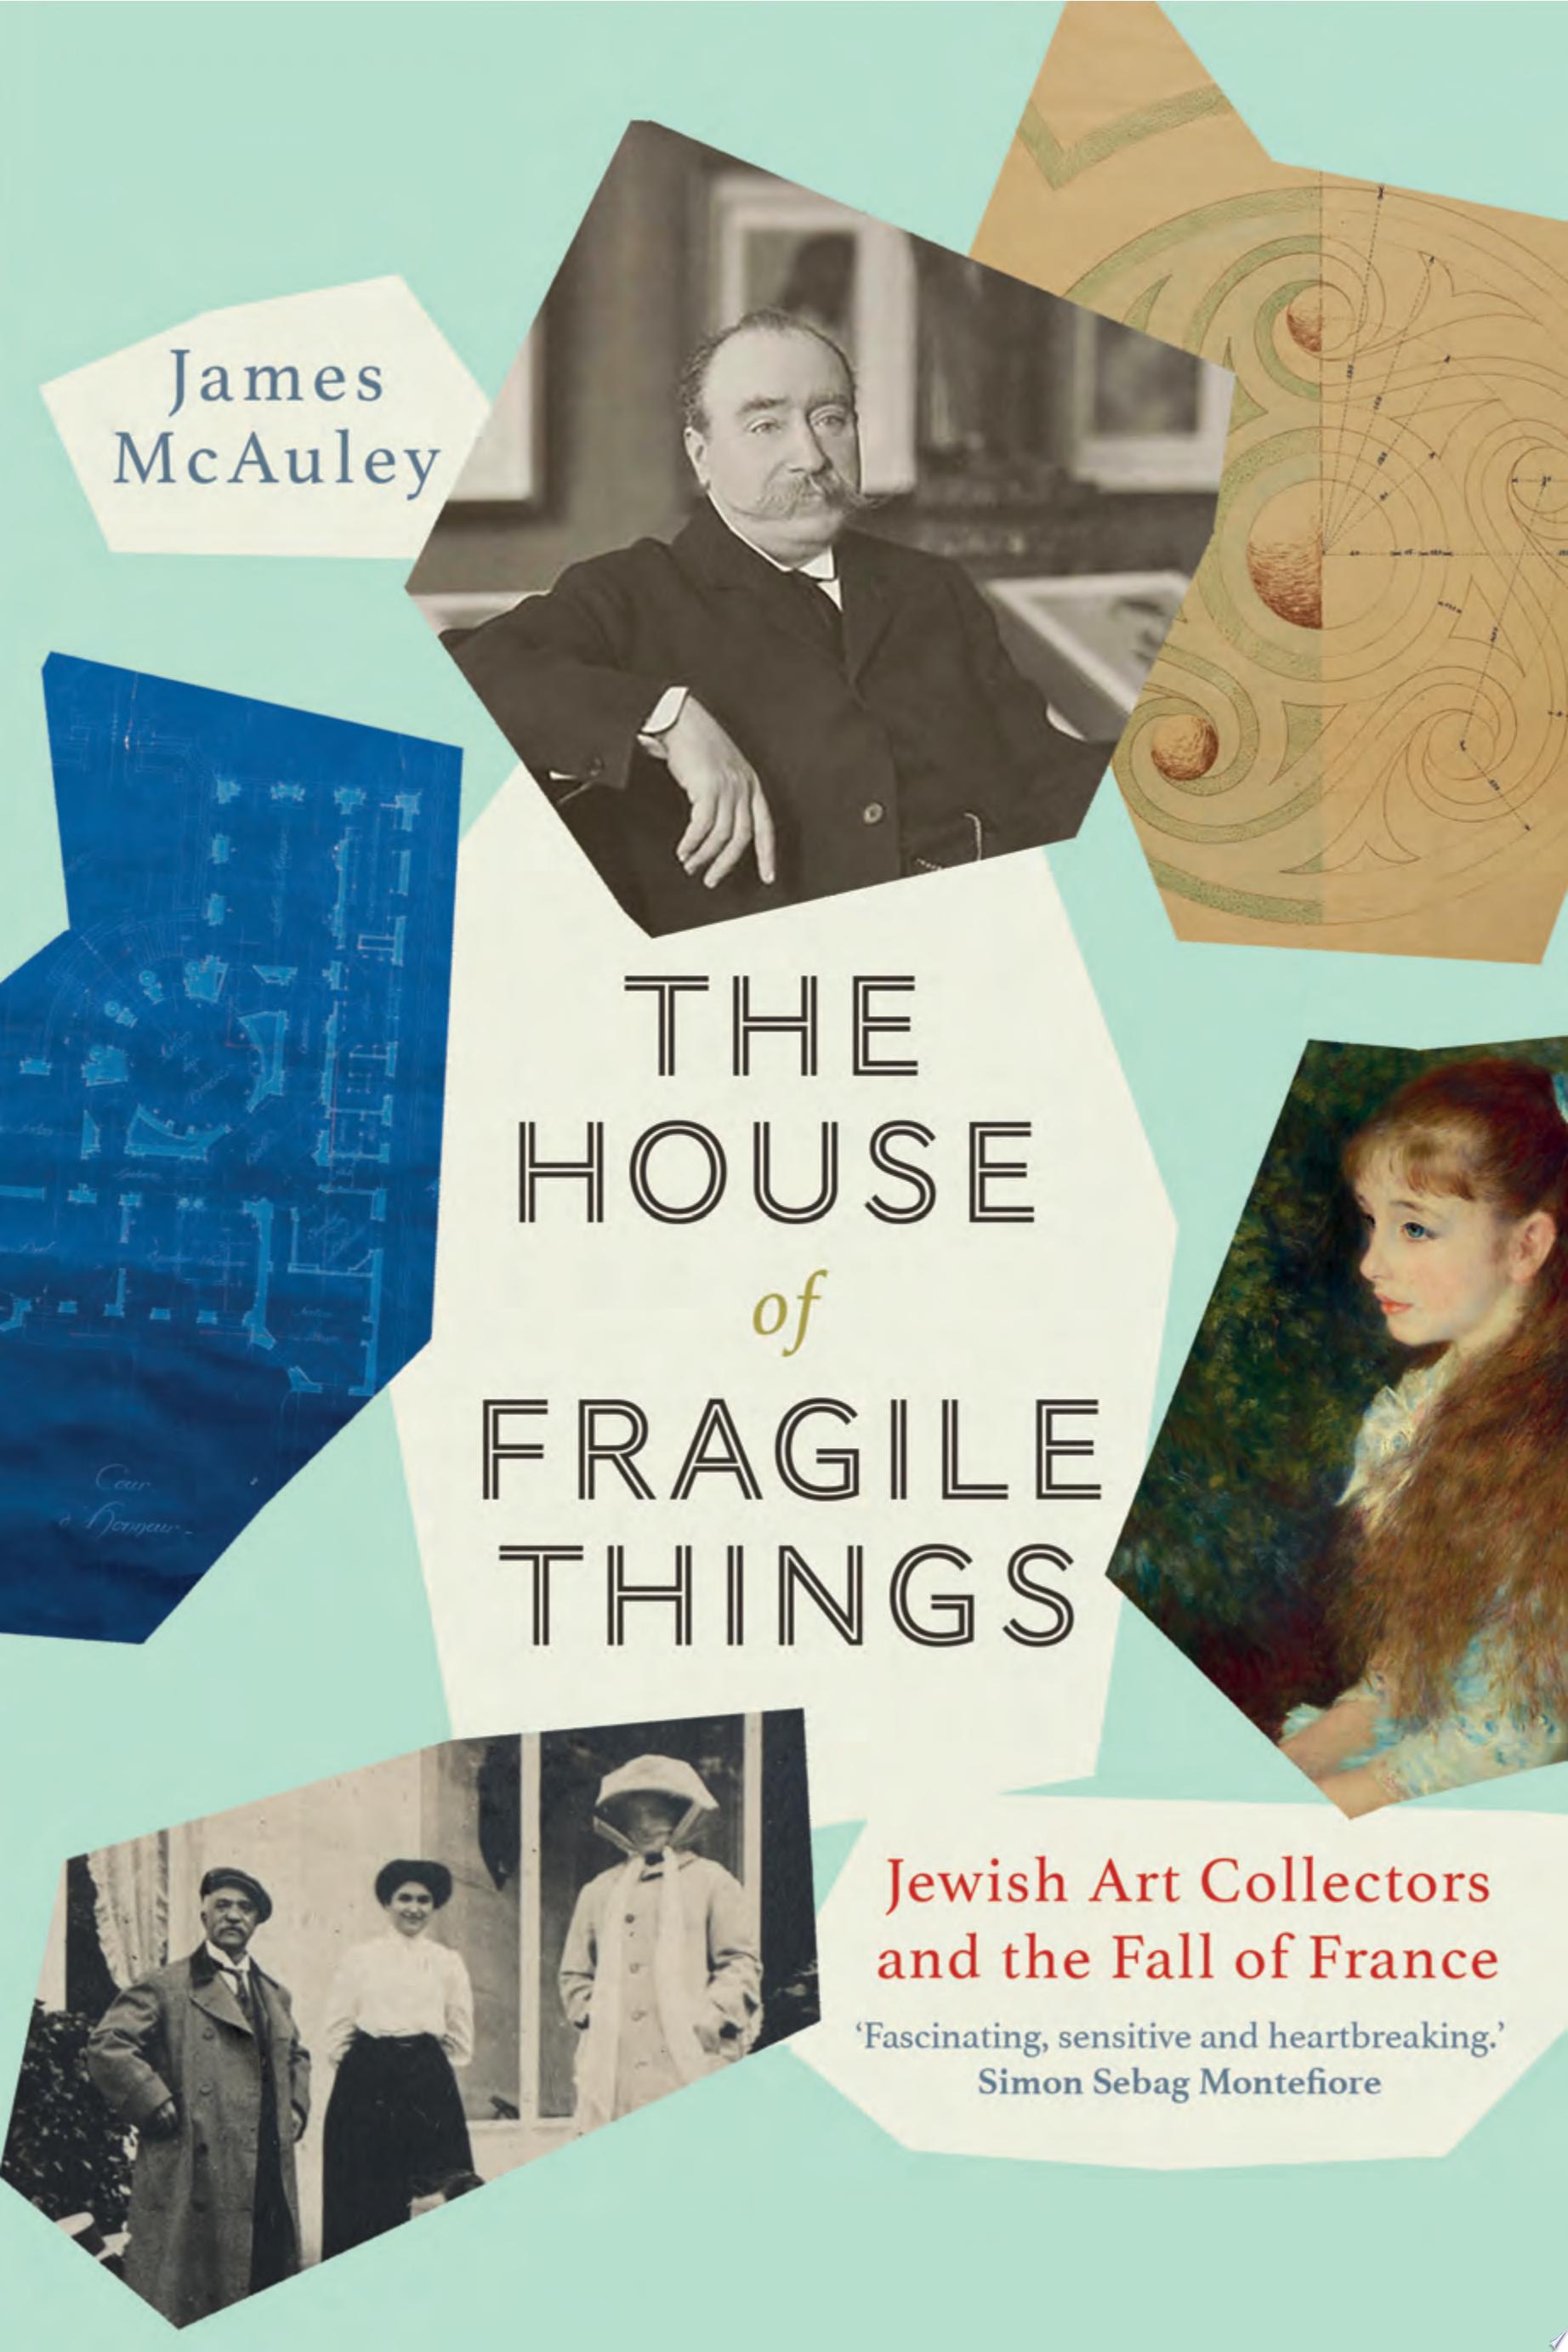 Image for "The House of Fragile Things"